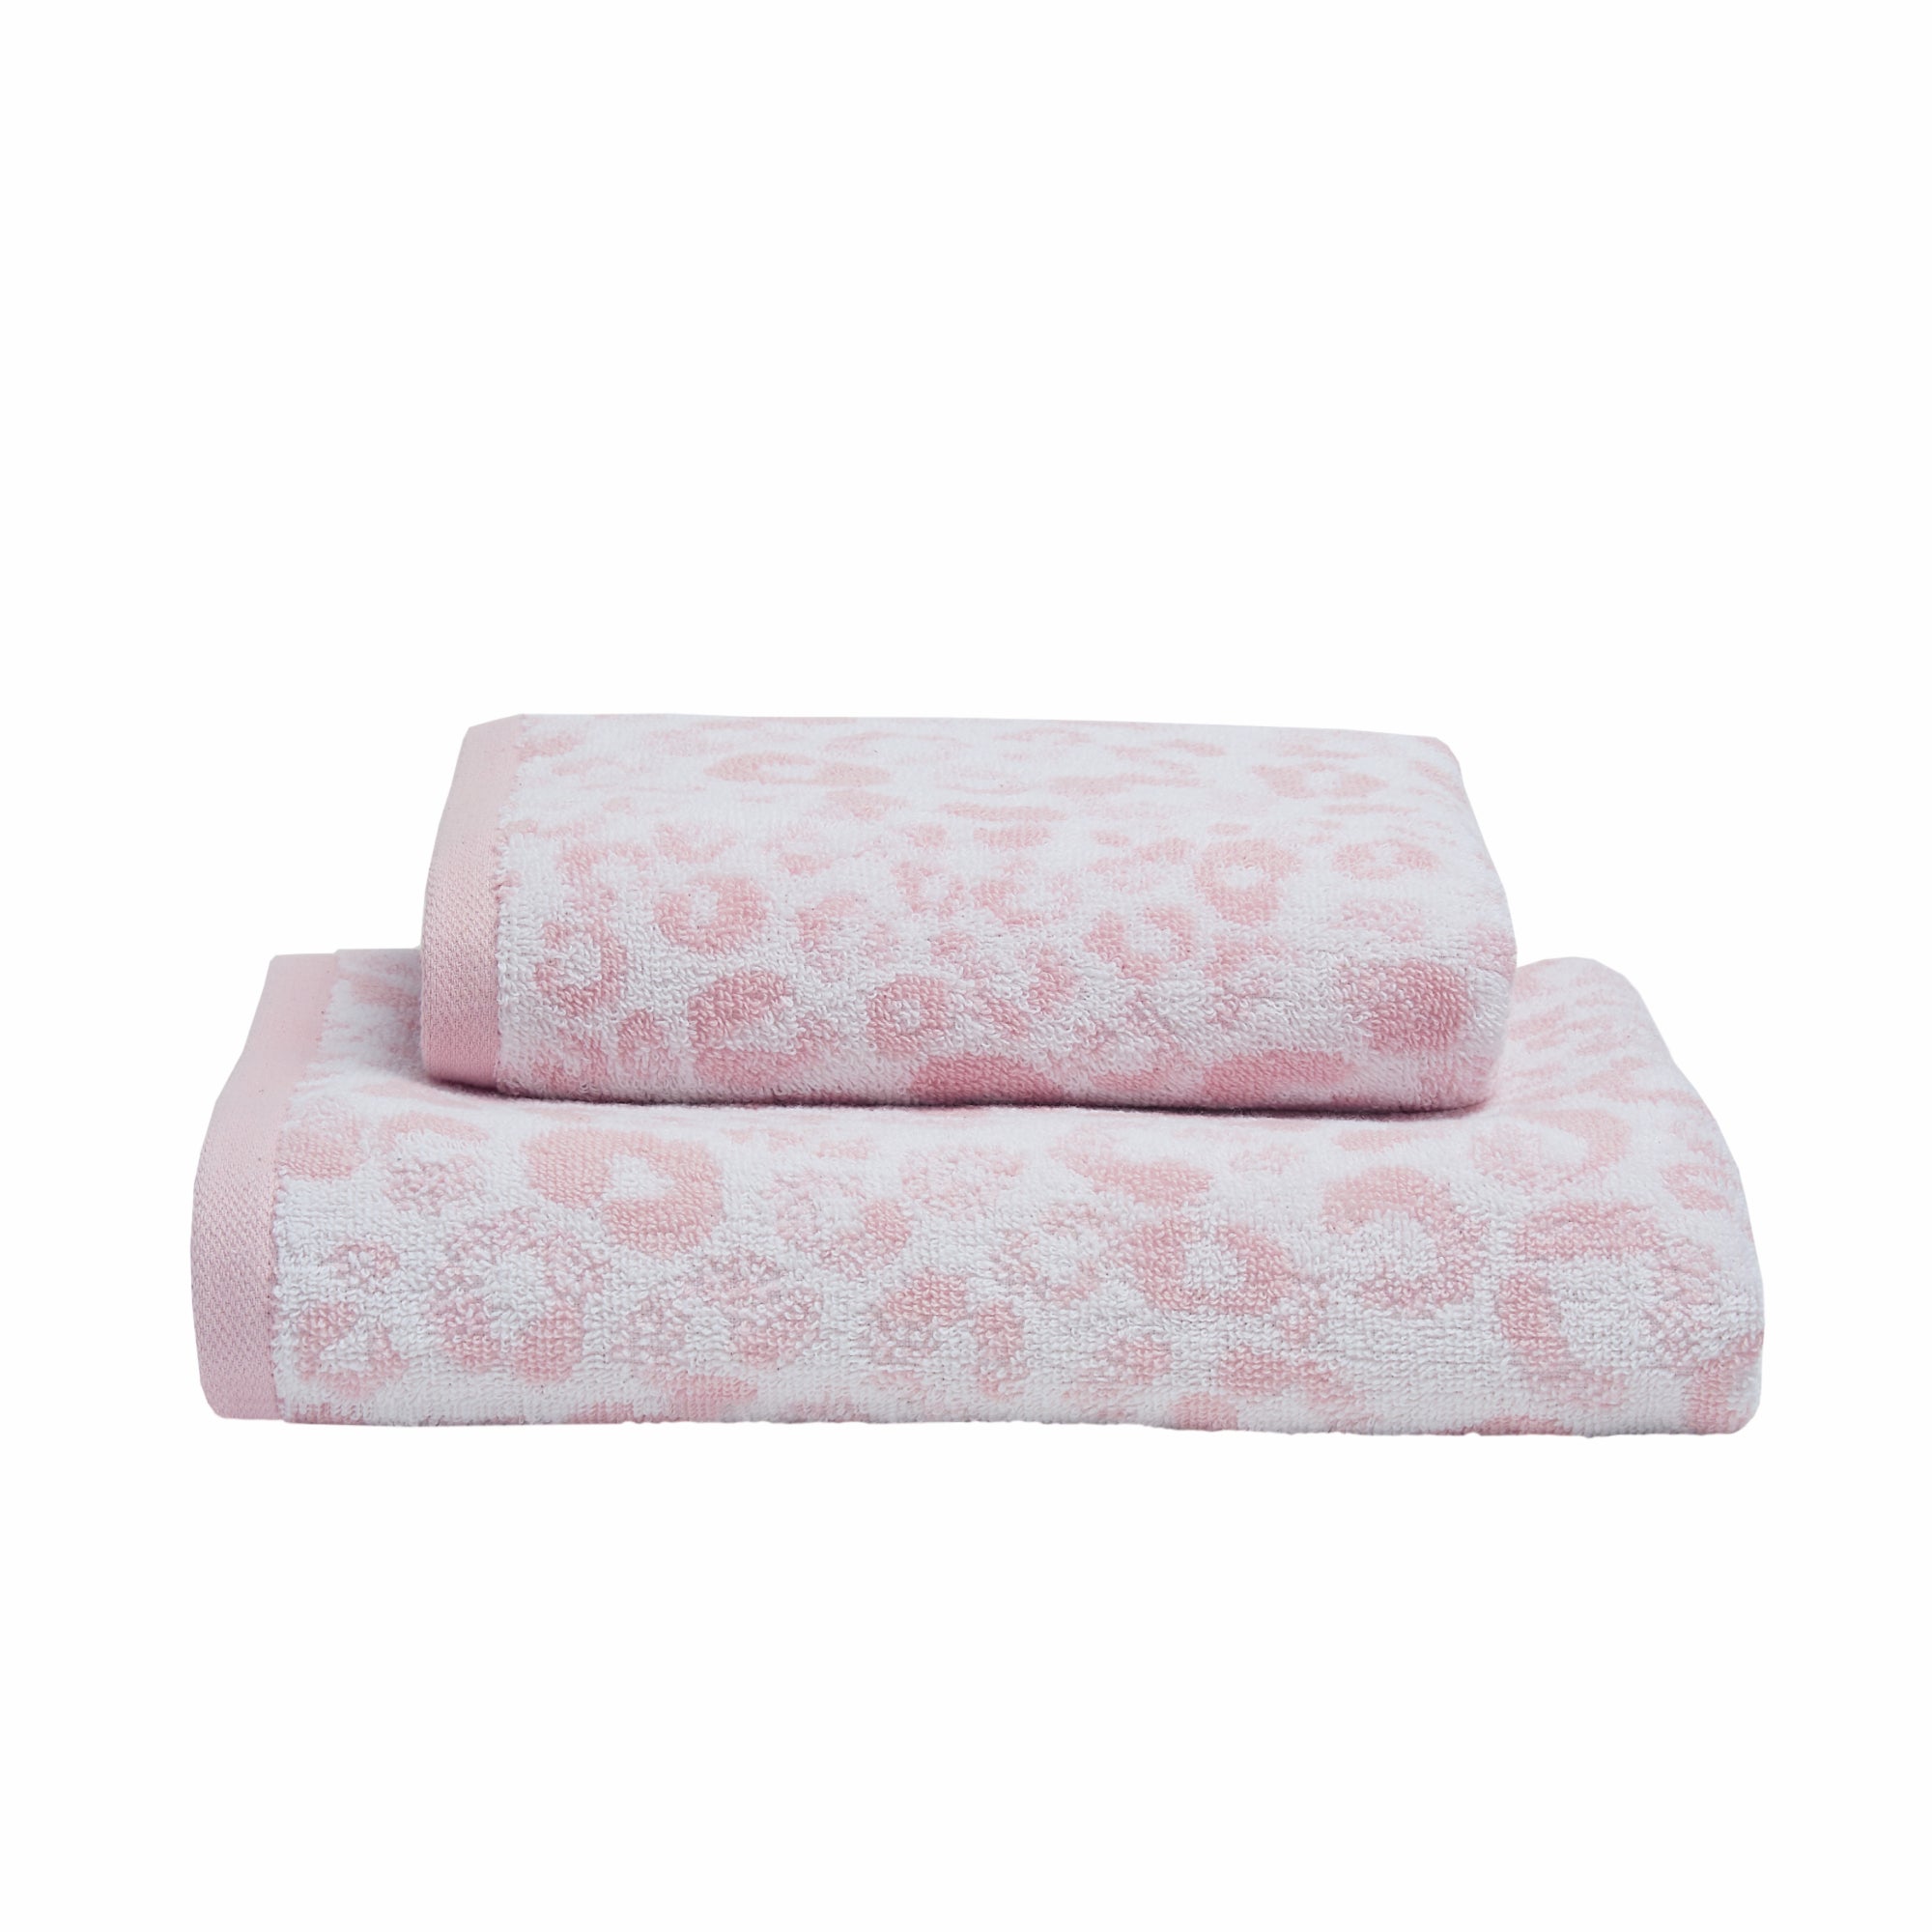 Animal Print Hand and Bath Towels by Fusion Bathroom in Blush